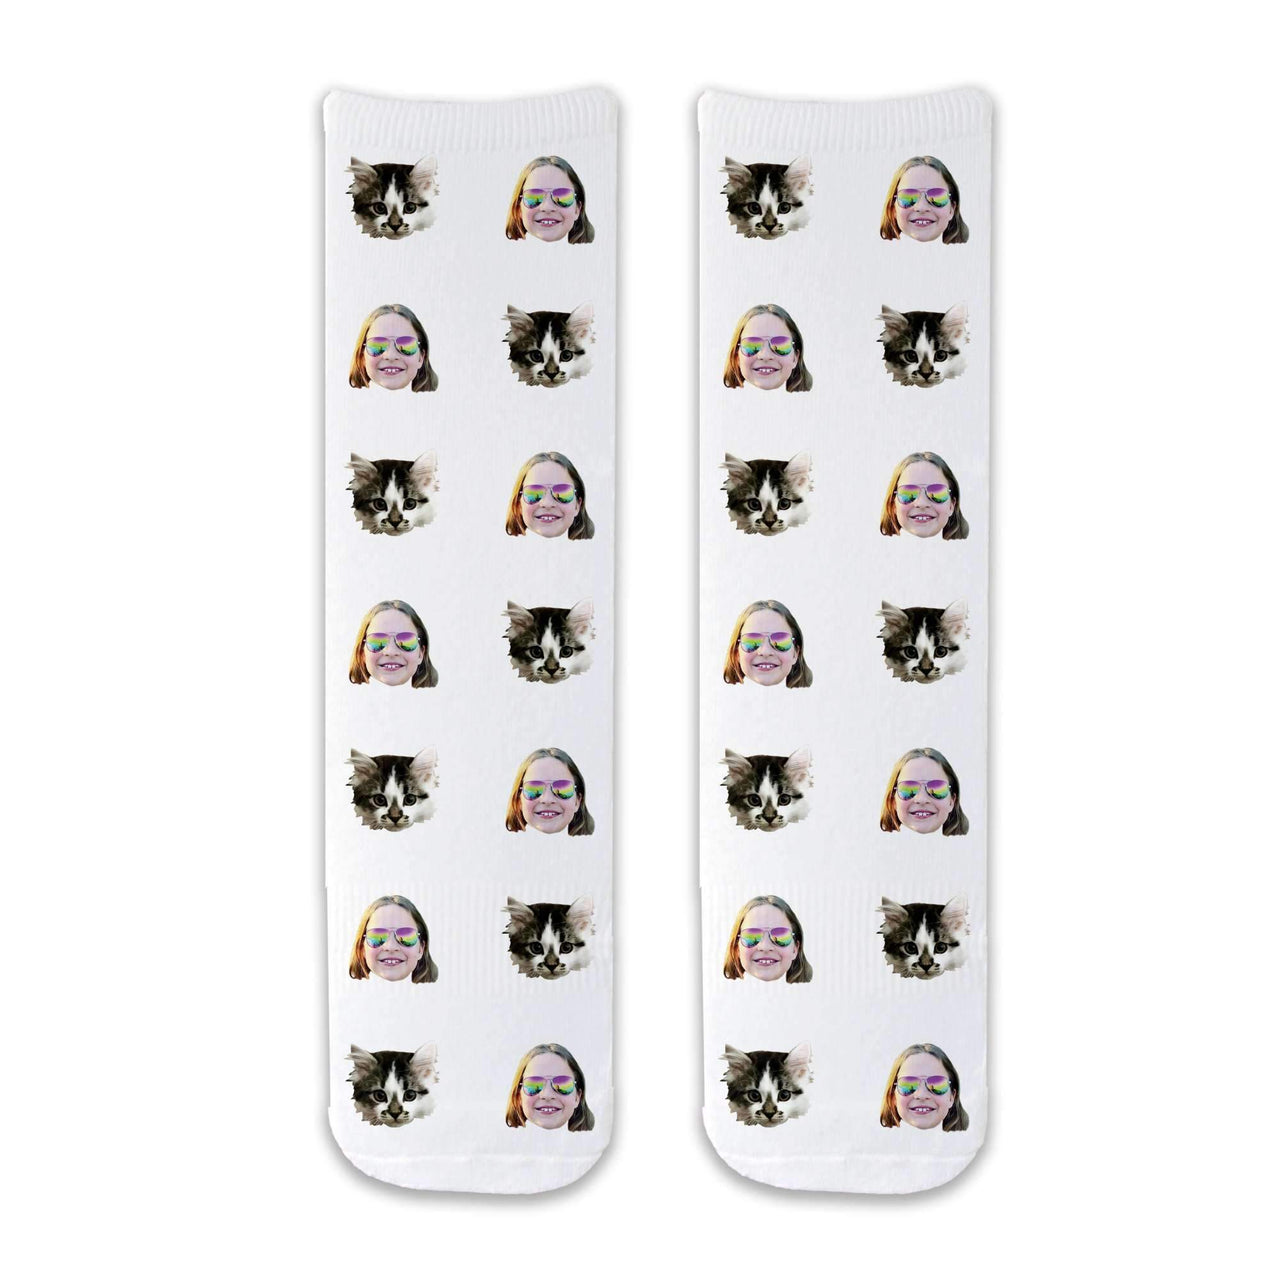 Adorable custom cat photo socks personalized using your photos printed all over the cotton crew socks on white background.